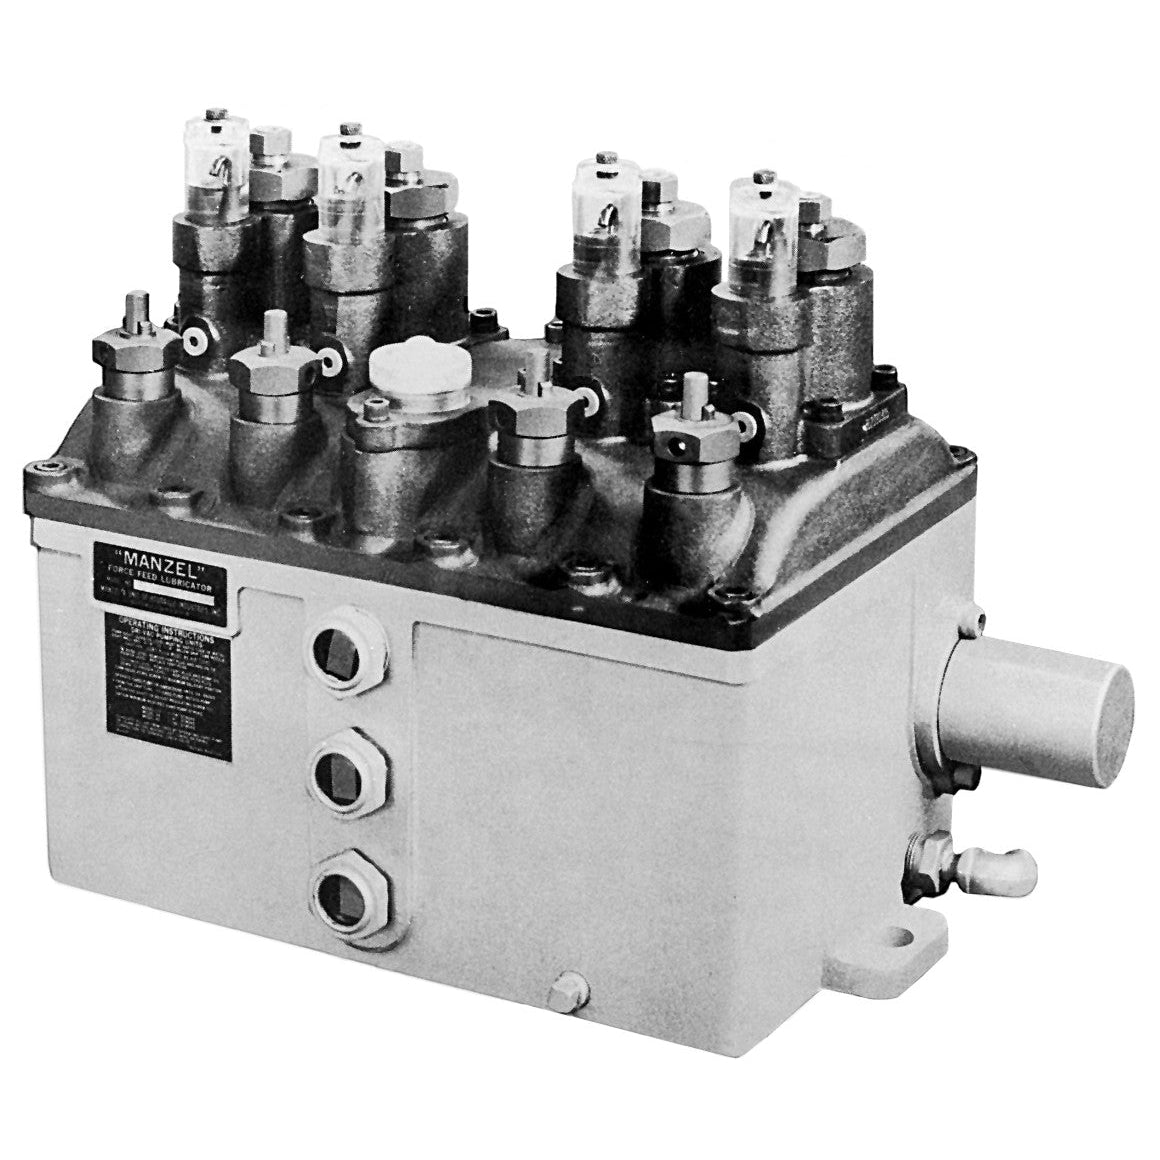 HP-50 Lubricator with 4 Pumps, Provisions for Flange Mounted Auto Fill, Low Level in Fill Plate